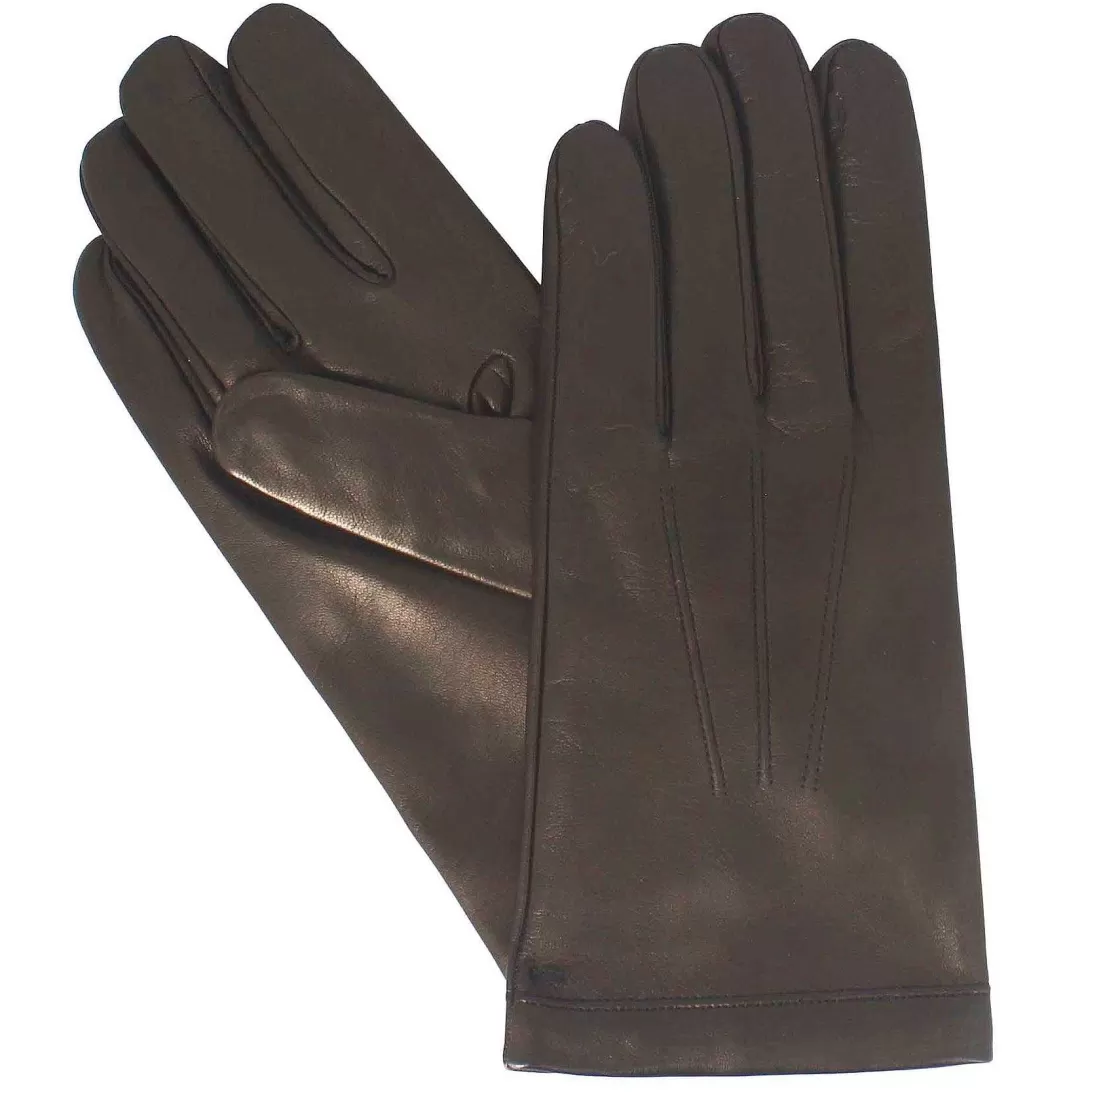 Leonardo Handmade Men'S Gloves In Brown Nappa Leather Lined In Cashmere New